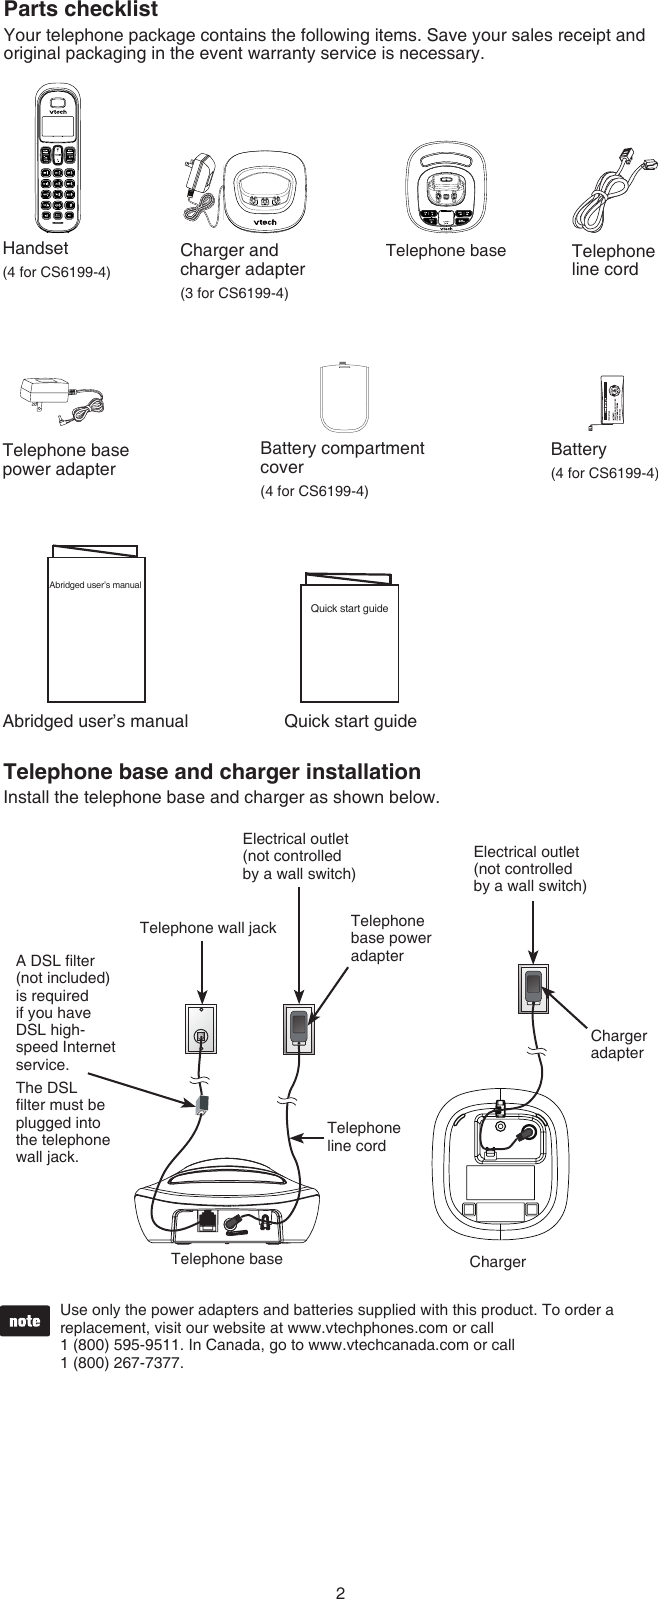 2Parts checklistYour telephone package contains the following items. Save your sales receipt and original packaging in the event warranty service is necessary.Telephone base and charger installationInstall the telephone base and charger as shown below.Use only the power adapters and batteries supplied with this product. To order a replacement, visit our website at www.vtechphones.com or call  1 (800) 595-9511. In Canada, go to www.vtechcanada.com or call  1 (800) 267-7377.•Telephone base ChargerElectrical outlet (not controlled  by a wall switch)Telephone base power adapterTelephone line cordTelephone wall jackA DSL lter (not included) is required if you have DSL high-speed Internet service. The DSL lter must be plugged into the telephone wall jack.Telephone line cordTelephone base                     power adapterHandset(4 for CS6199-4)Battery(4 for CS6199-4)Battery compartment cover(4 for CS6199-4)Charger and                      charger adapter(3 for CS6199-4)Telephone baseAbridged user’s manualAbridged user’s manualQuick start guideQuick start guideCharger adapterElectrical outlet (not controlled by a wall switch)